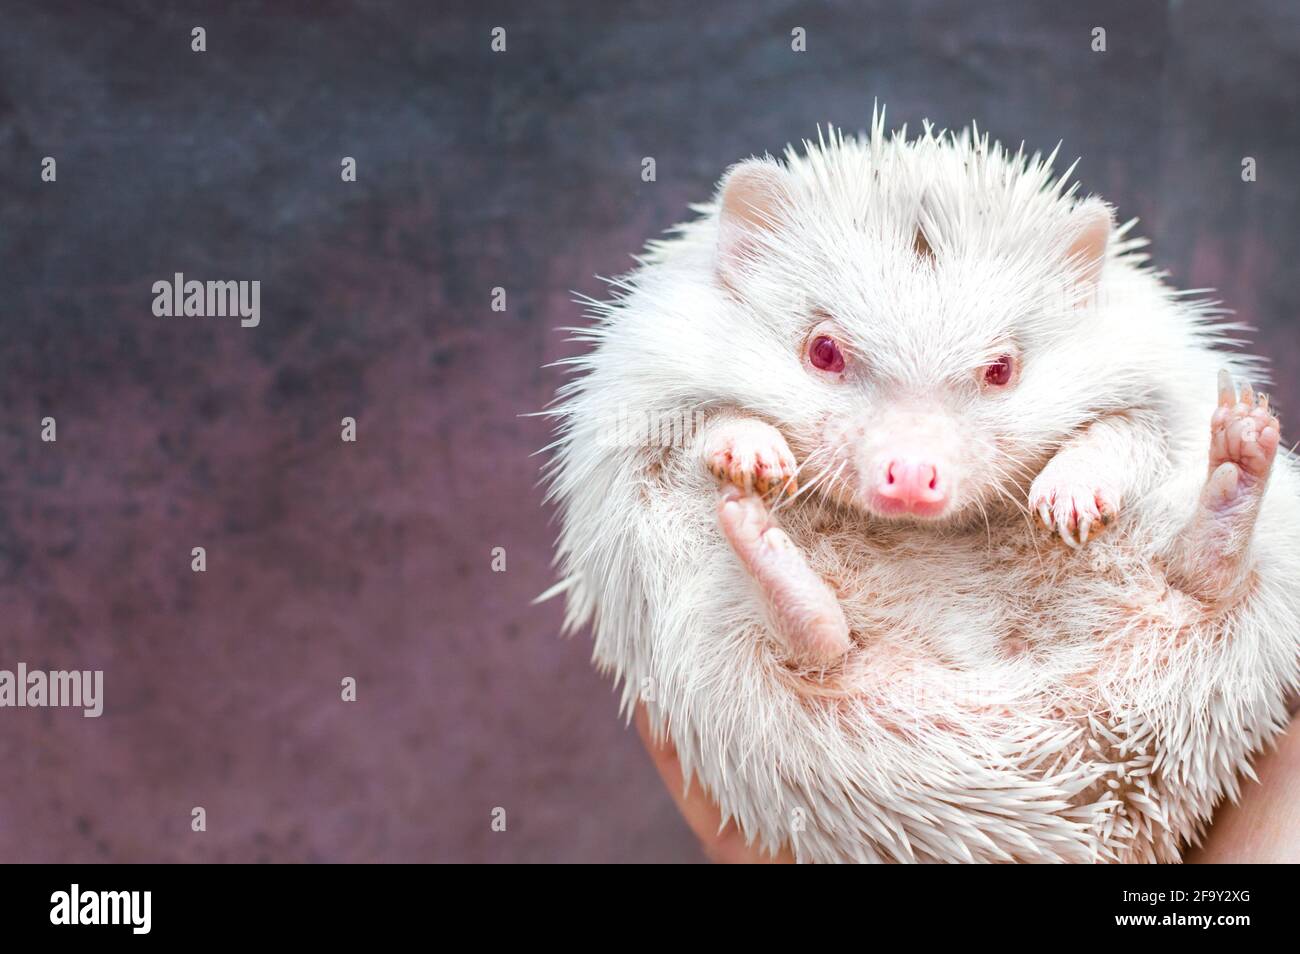 African hedgehog on a gray background albino white color close-up on a man's hand Stock Photo